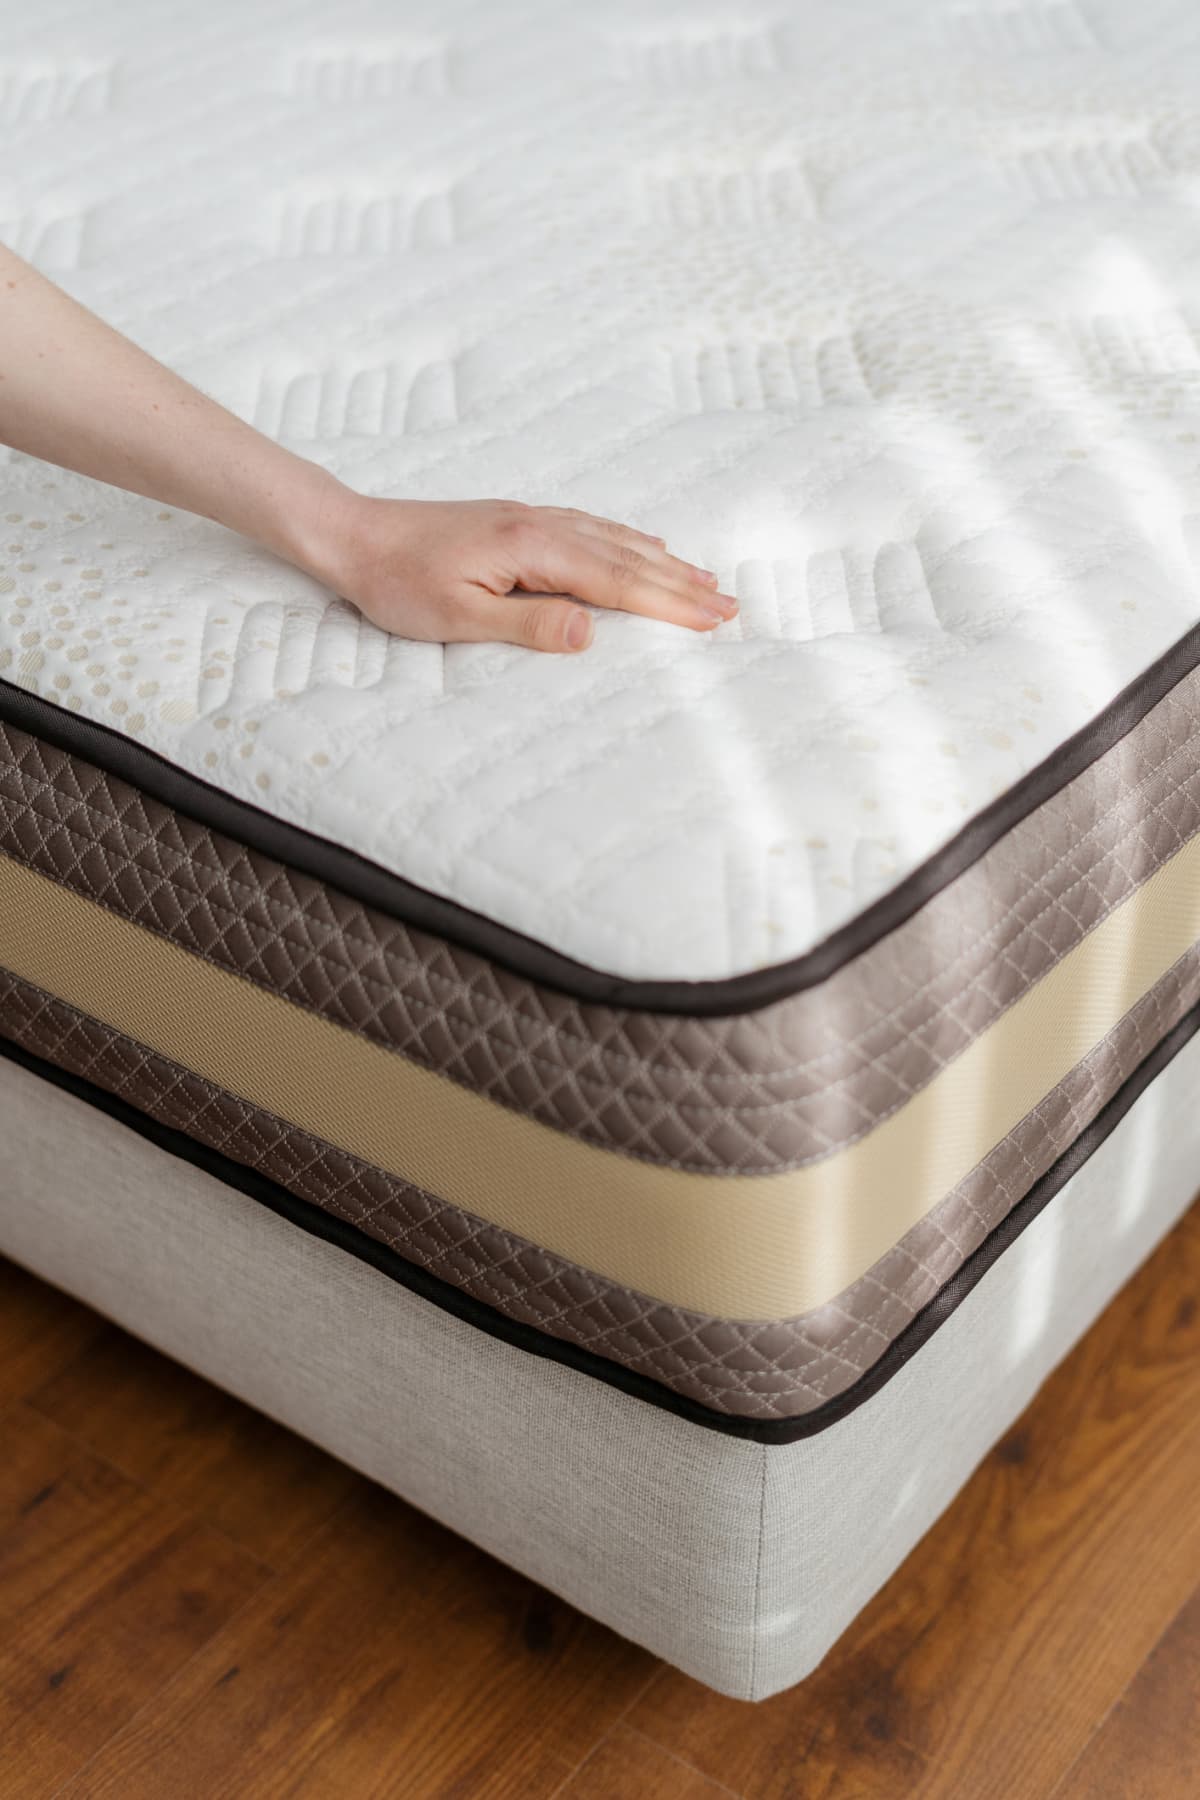 A person inspecting new bed topper on sleeping mattress